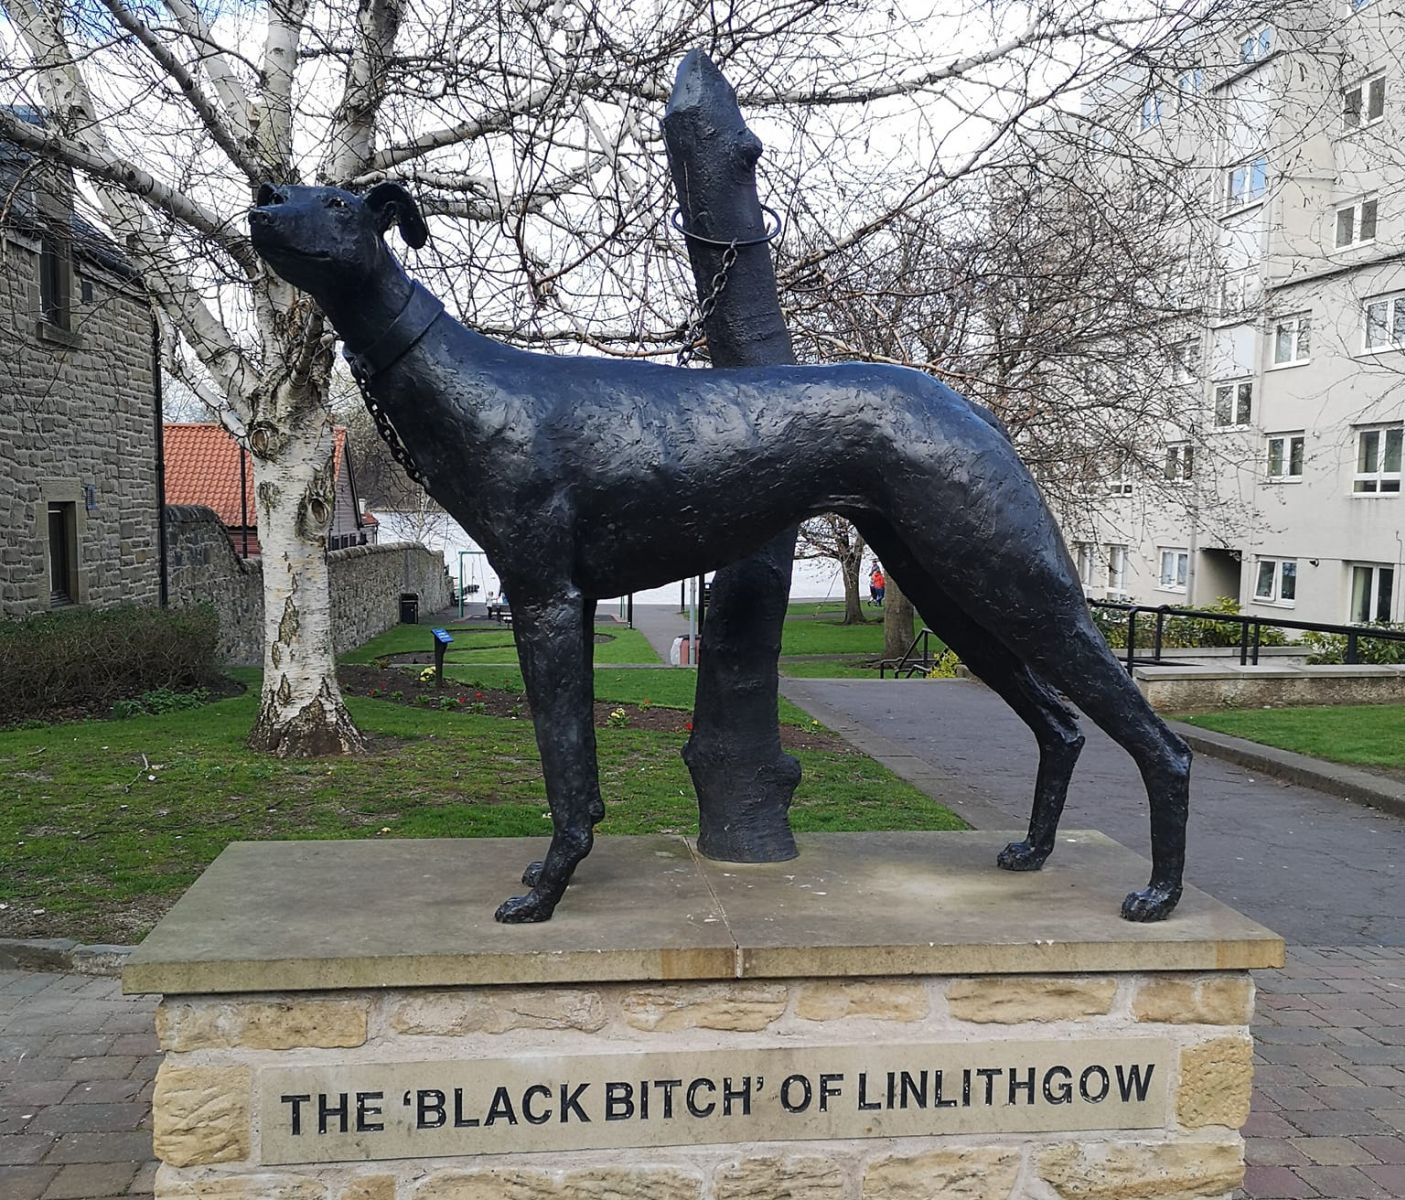 The Black Bitch of Linlithgow